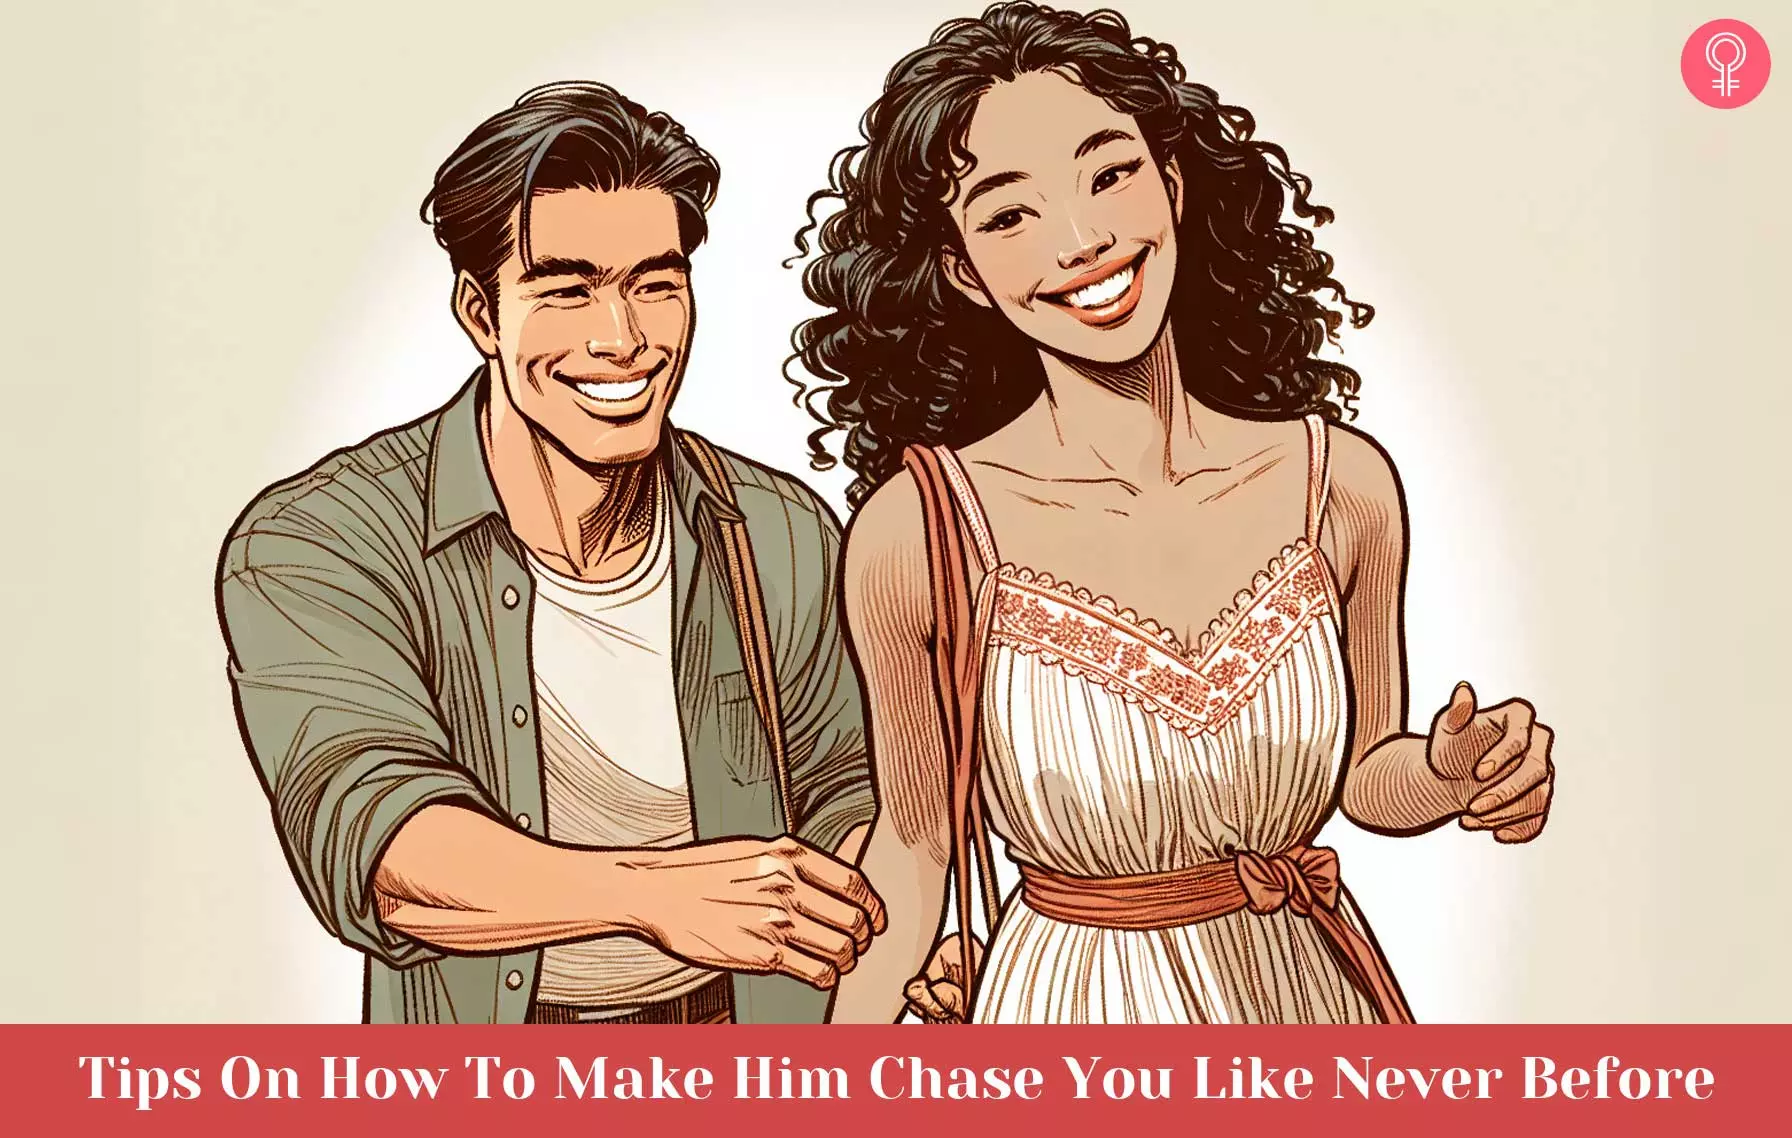 12 Tips On How To Make Him Chase You Like Never Before